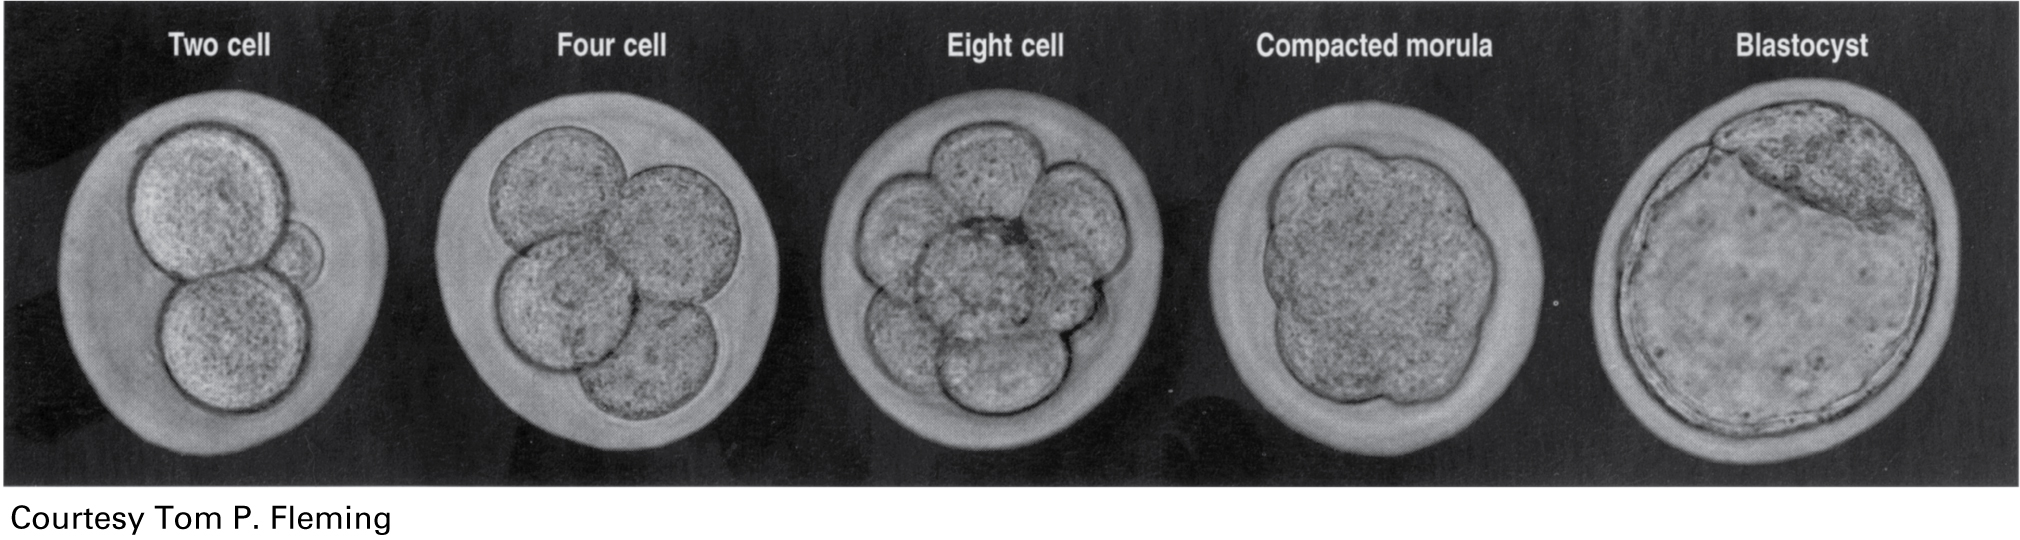 Figure 21-3. Cleavage divisions in the mouse embryo. Embryos are shown at the five stages: two cell, four cell, eight cell, compacted morula, and blastocyst. There is little cell growth during these early divisions, so that the cells become progressively smaller.